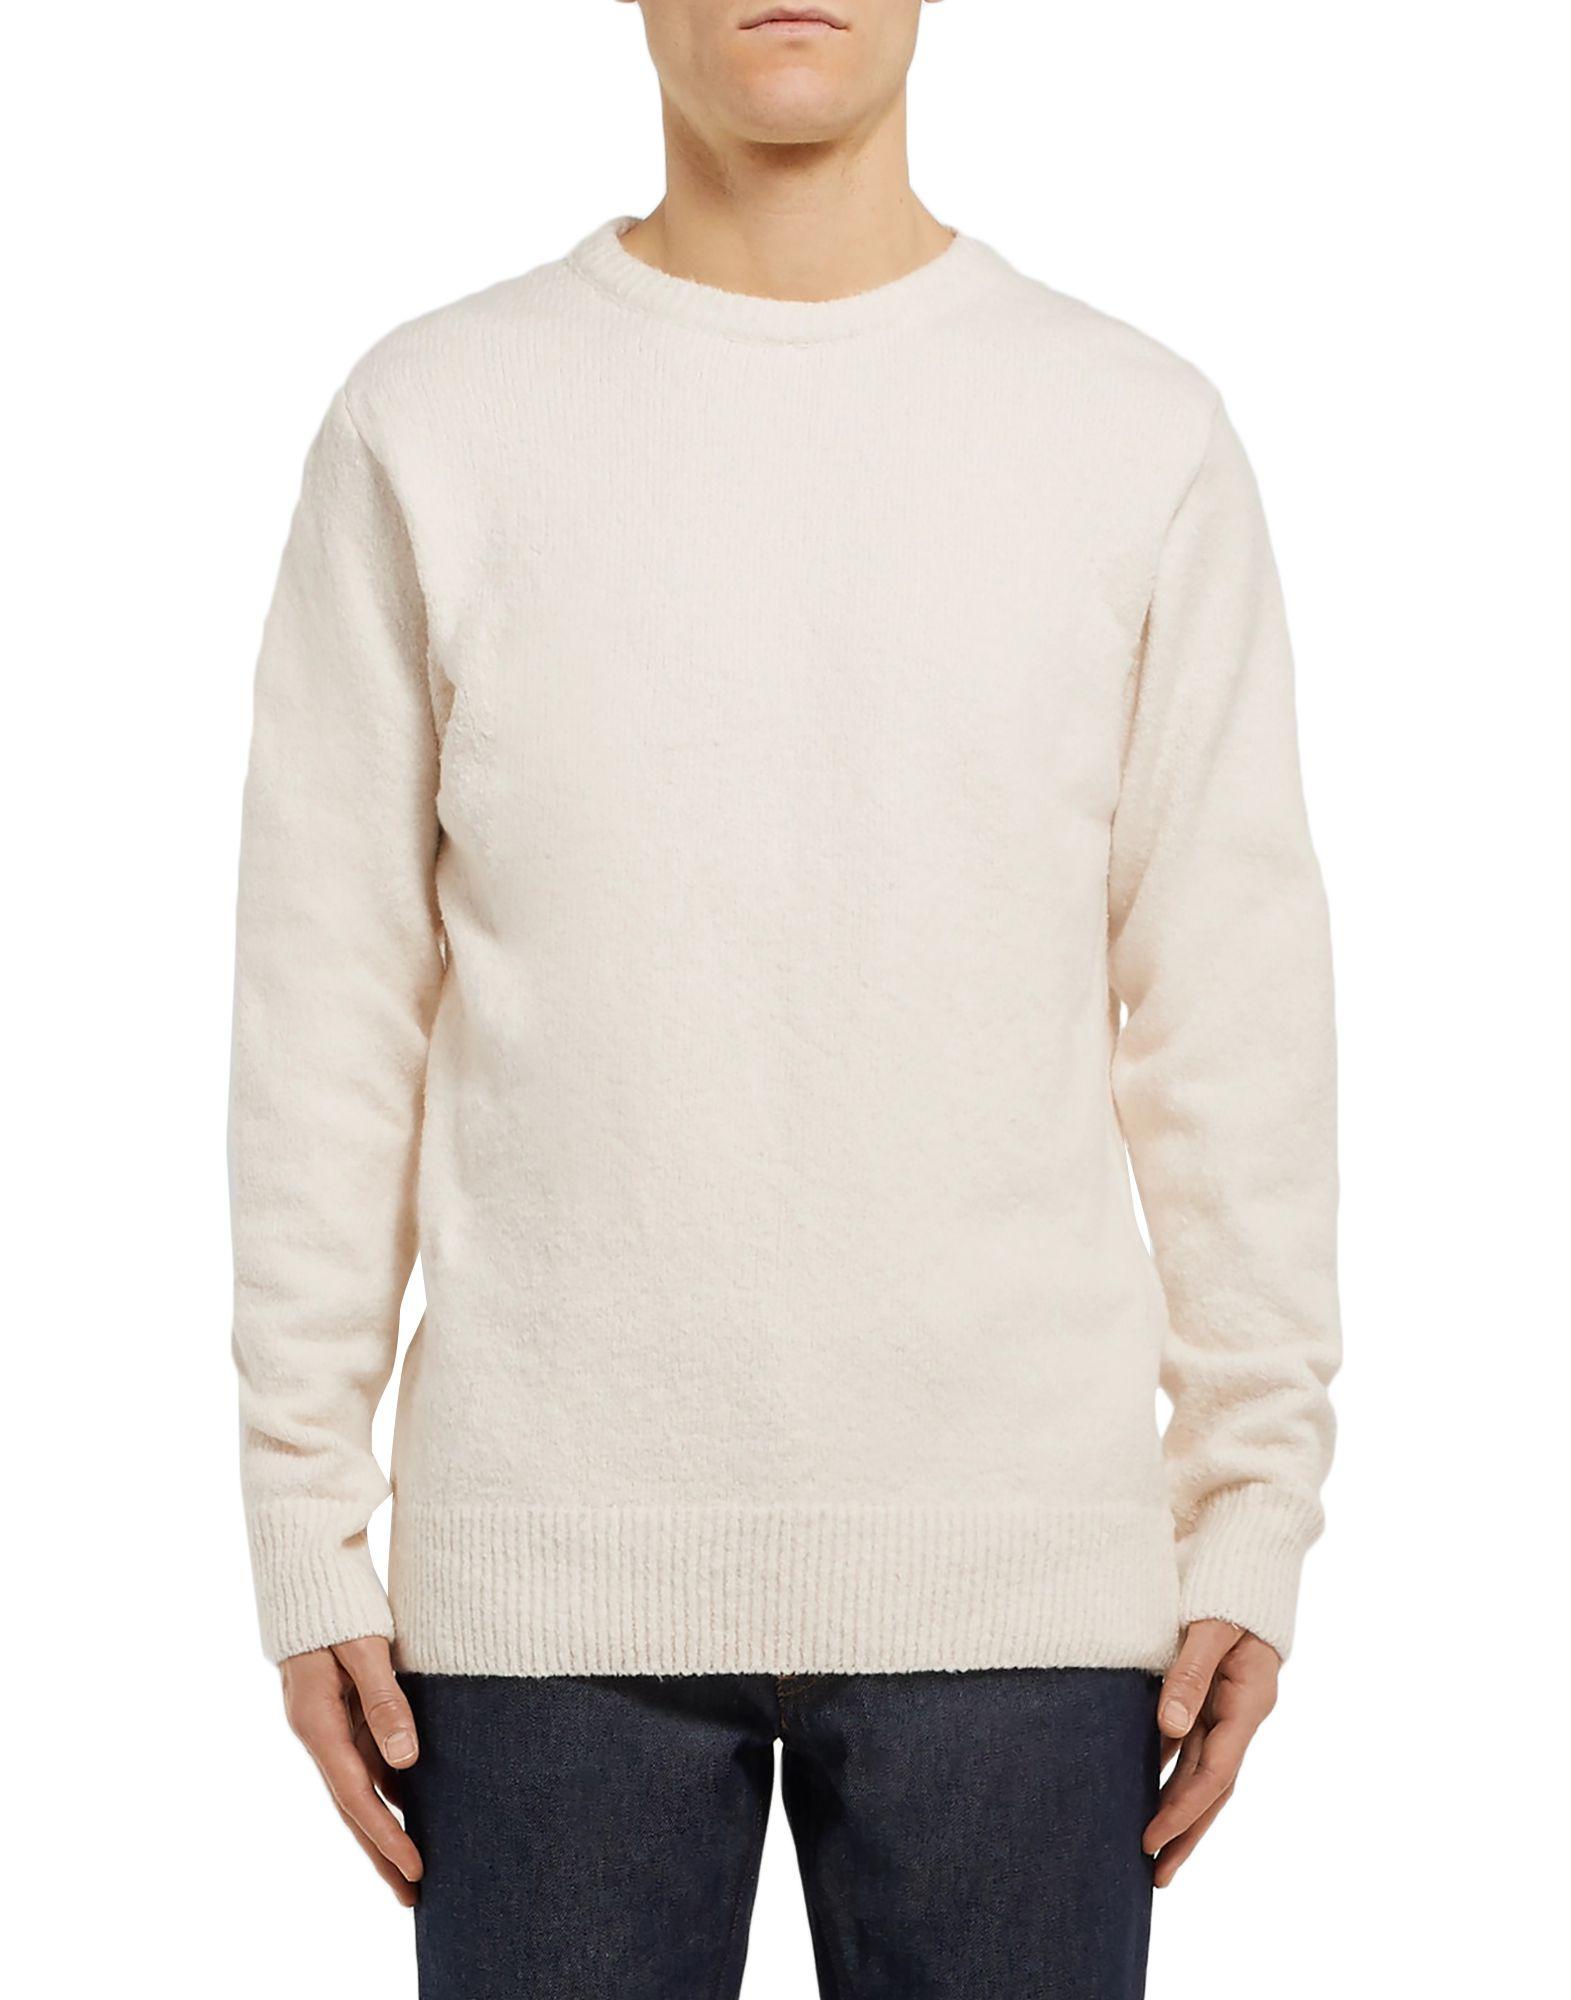 Howlin' By Morrison Sweater in Ivory (White) for Men - Lyst